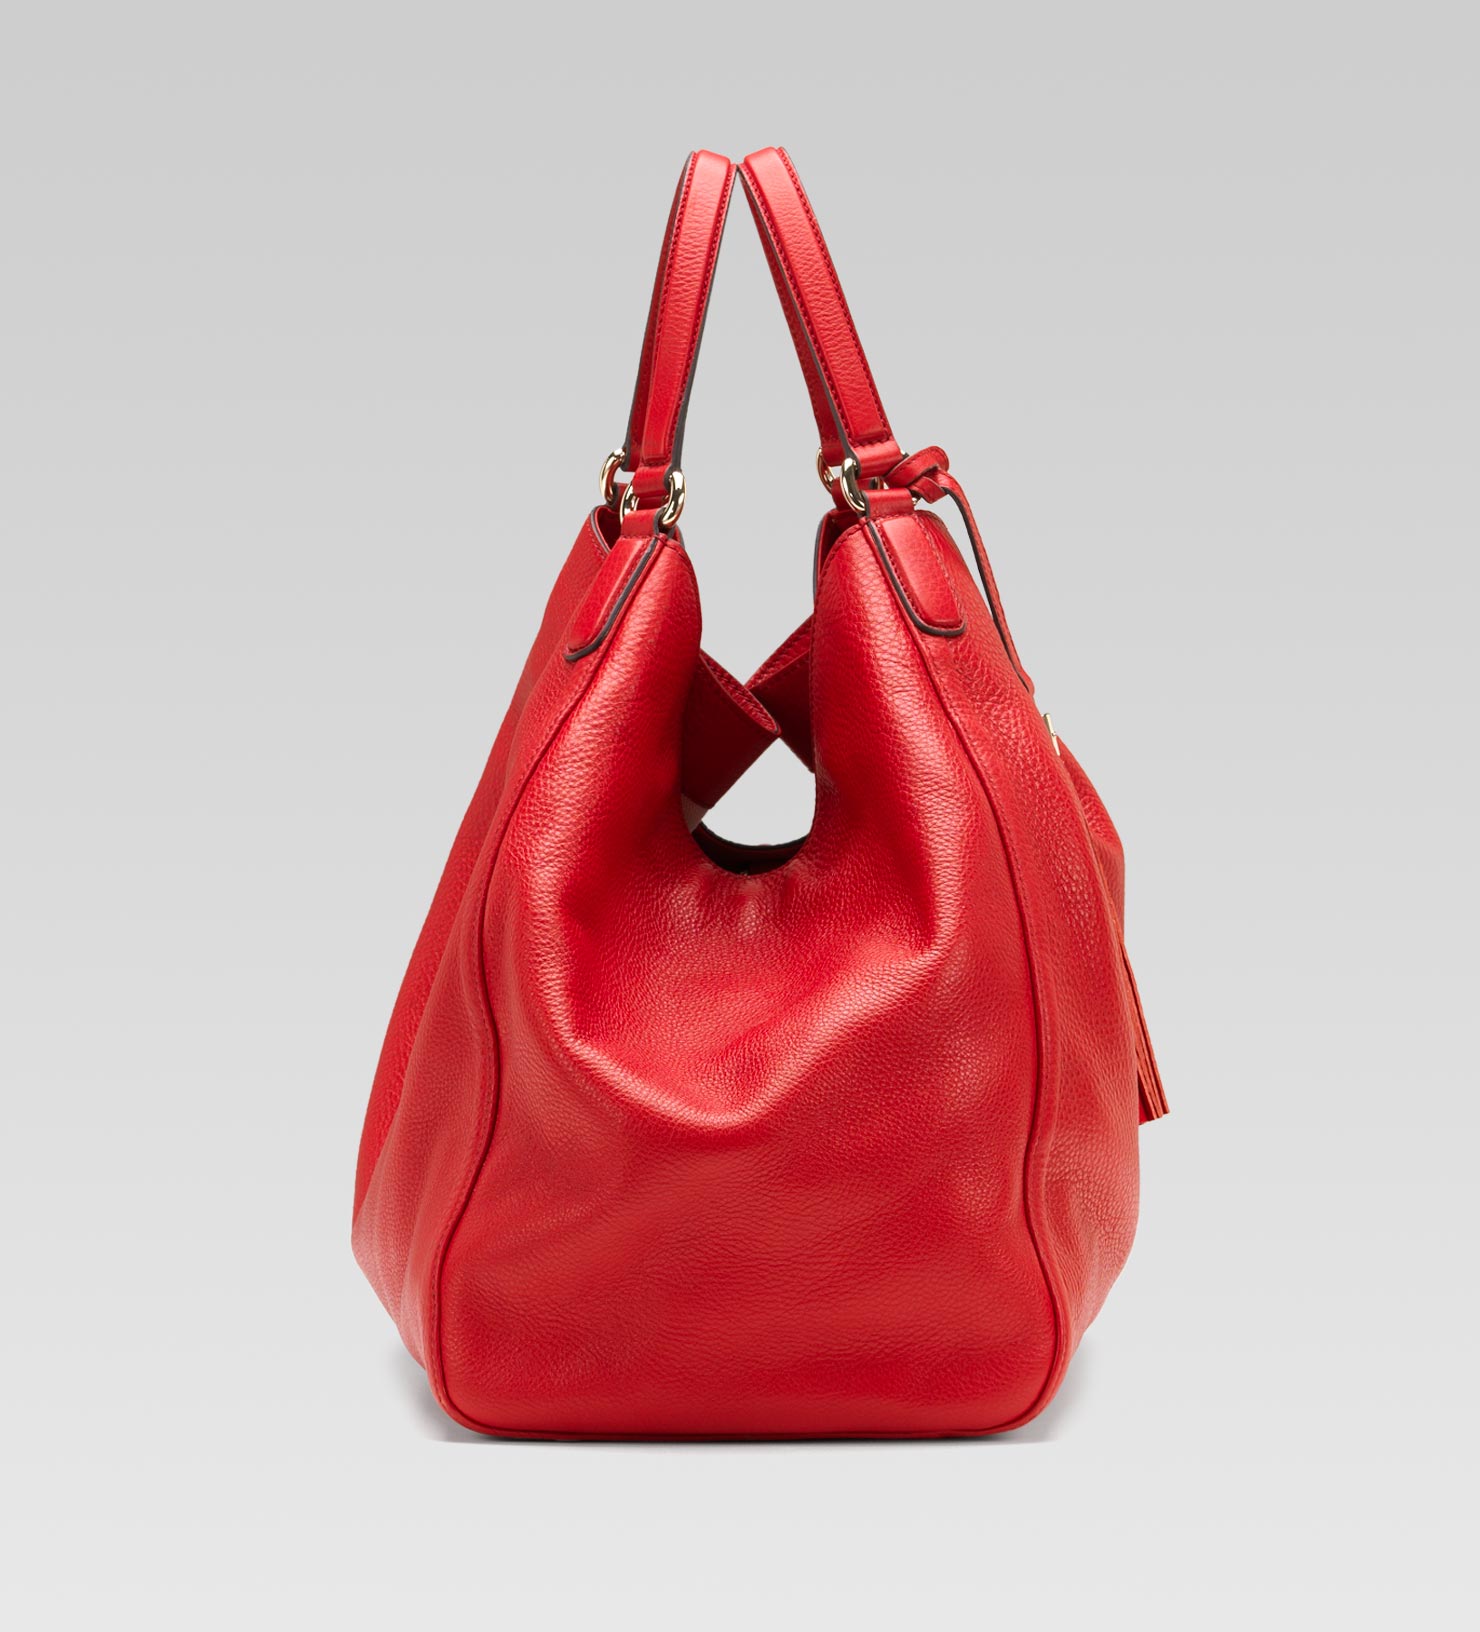 Gucci Soho Leather Shoulder Bag in Red | Lyst